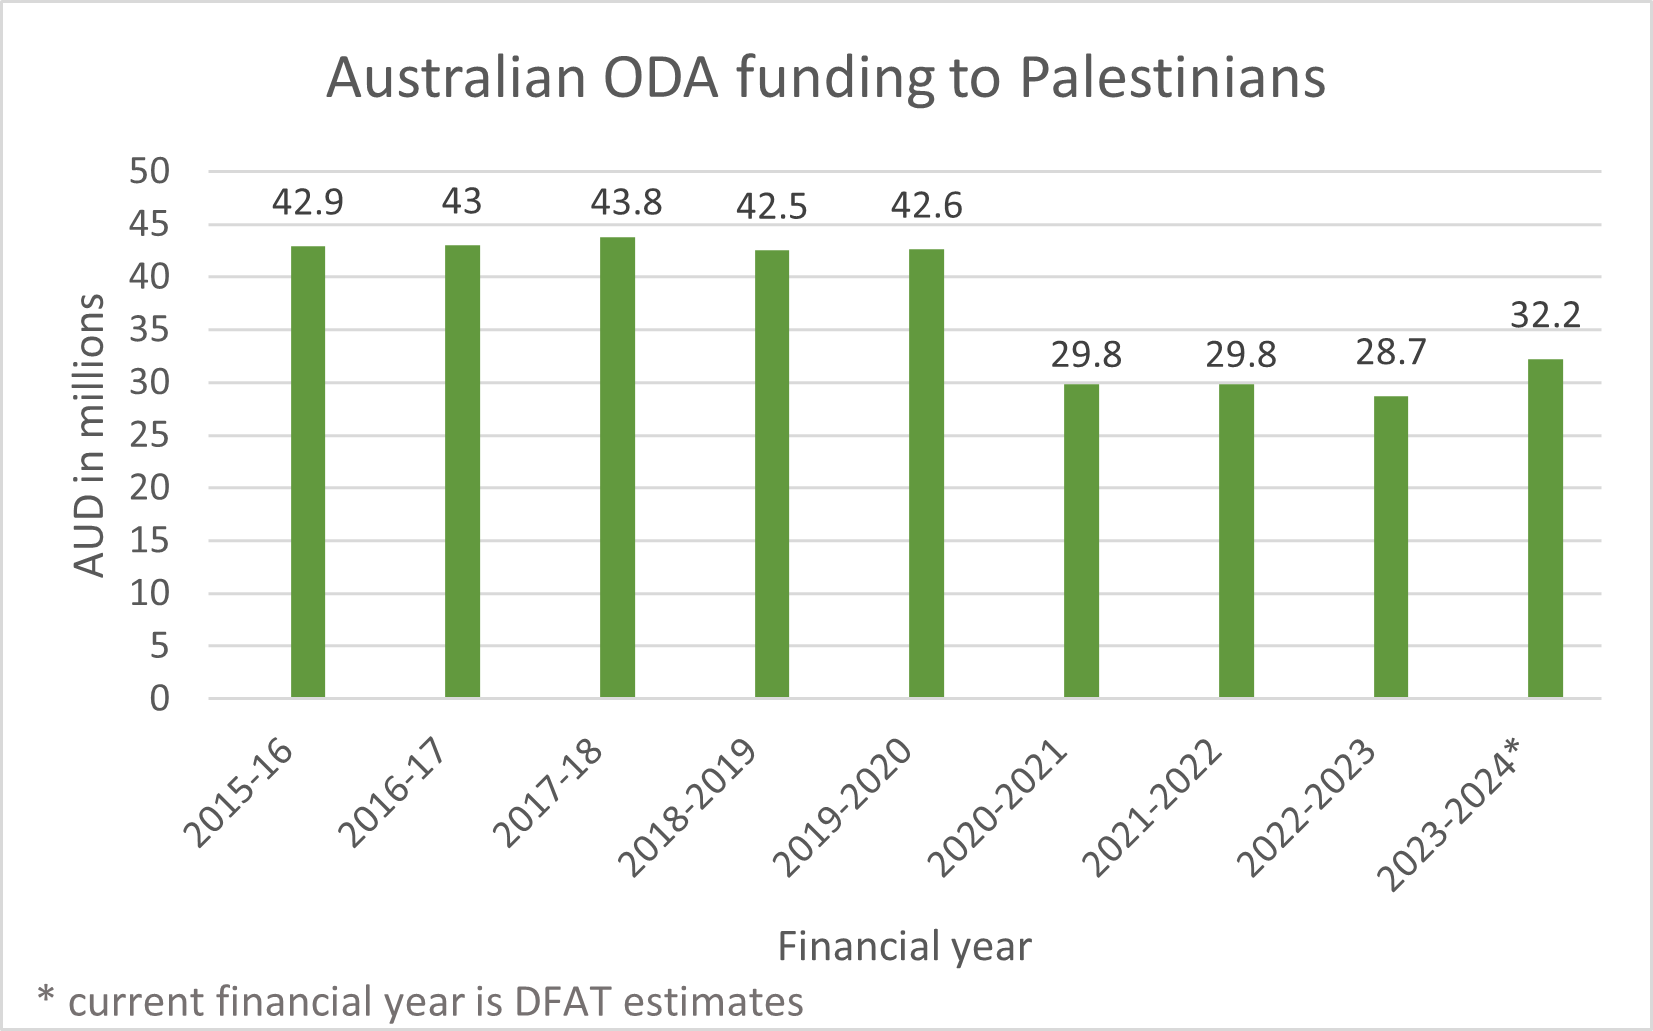 Graph showing funding to Palestine over the years. 